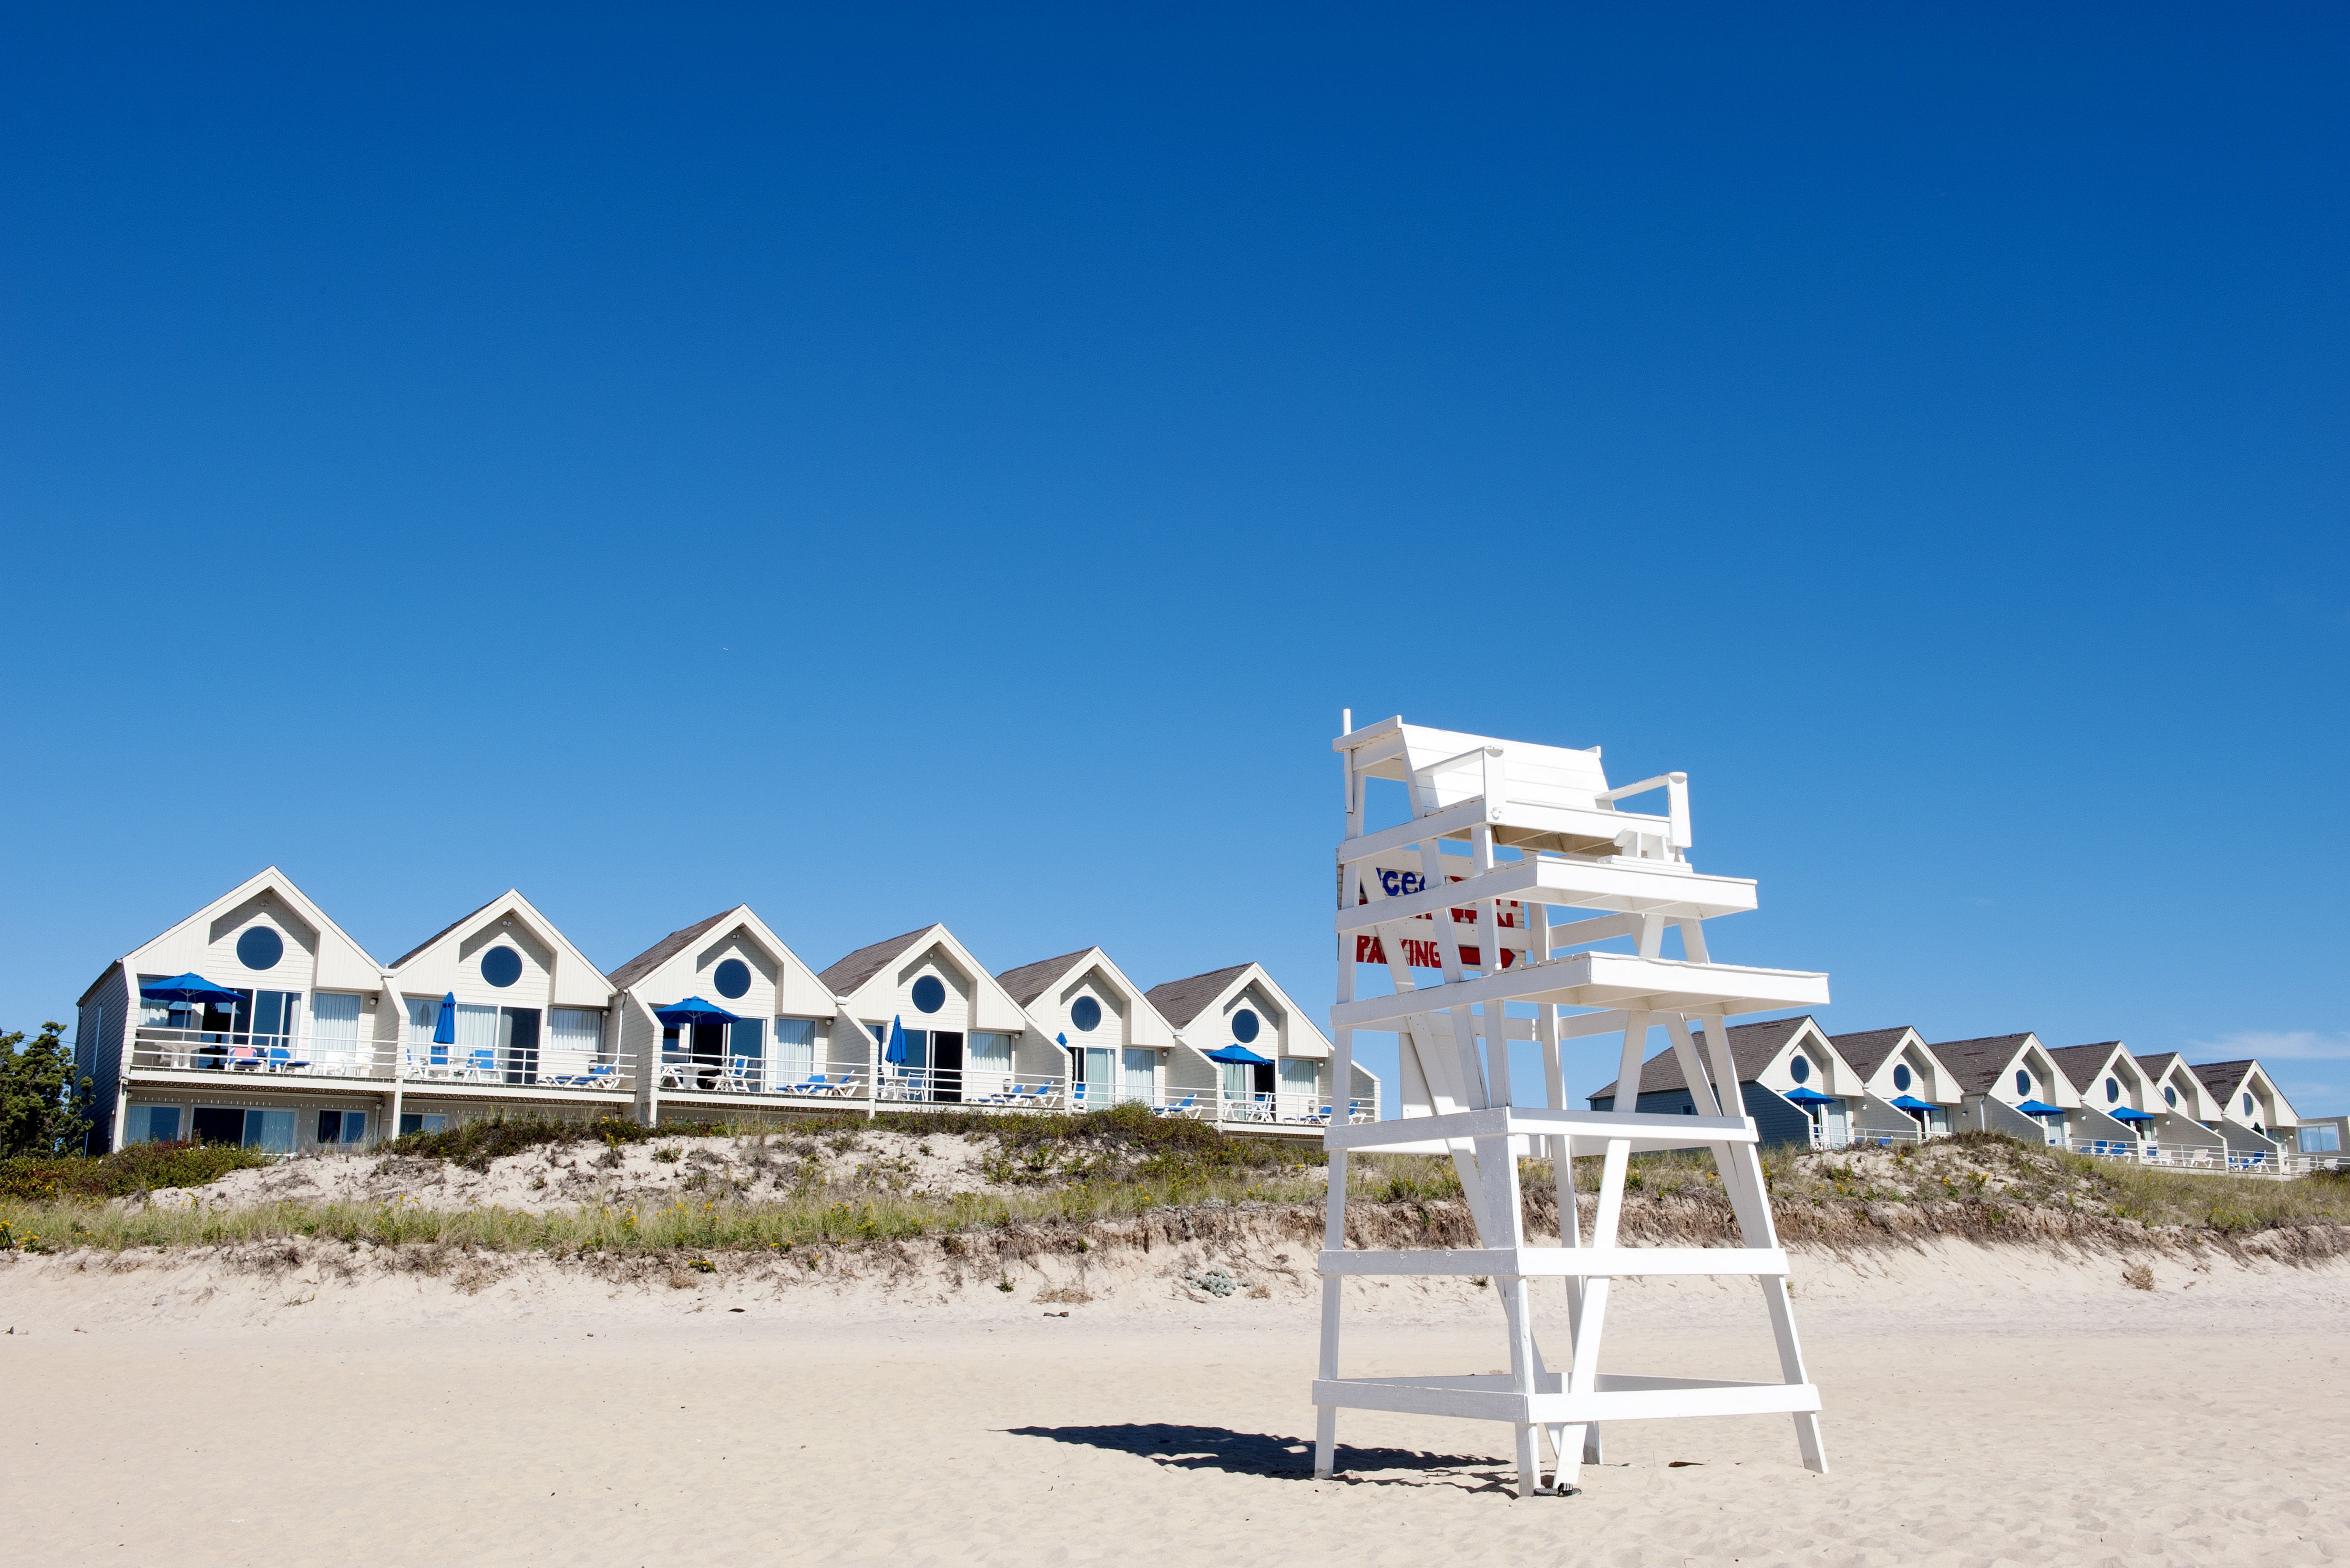 Most Affordable Beach House Locations   Where to Buy a Beach House